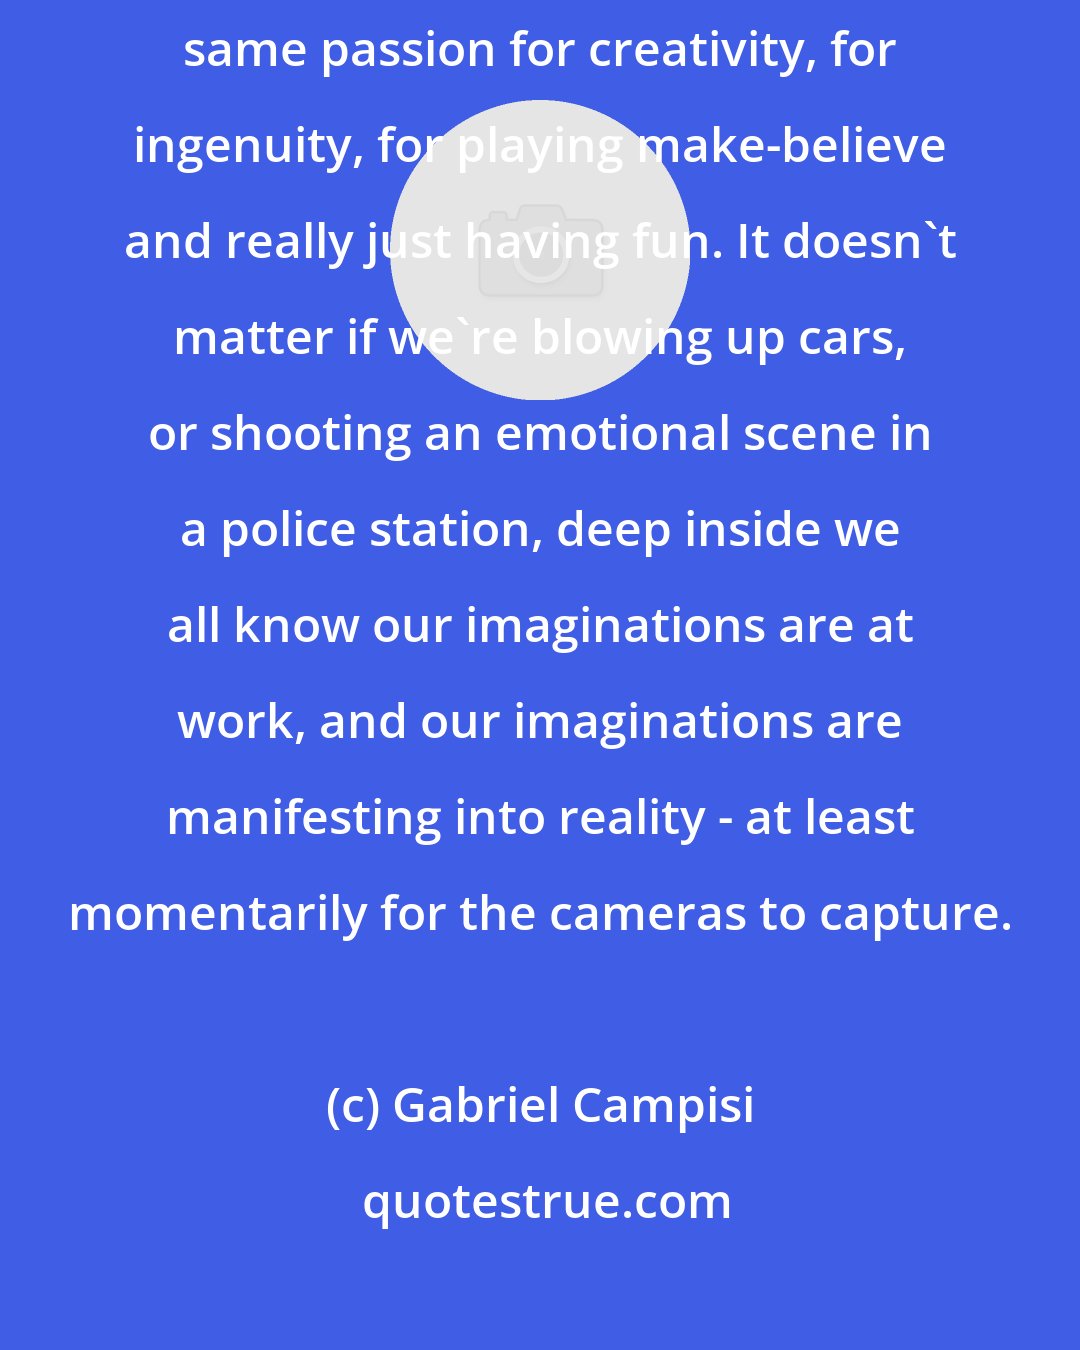 Gabriel Campisi: Most of the people I've been fortunate enough to work with all share the same passion for creativity, for ingenuity, for playing make-believe and really just having fun. It doesn't matter if we're blowing up cars, or shooting an emotional scene in a police station, deep inside we all know our imaginations are at work, and our imaginations are manifesting into reality - at least momentarily for the cameras to capture.